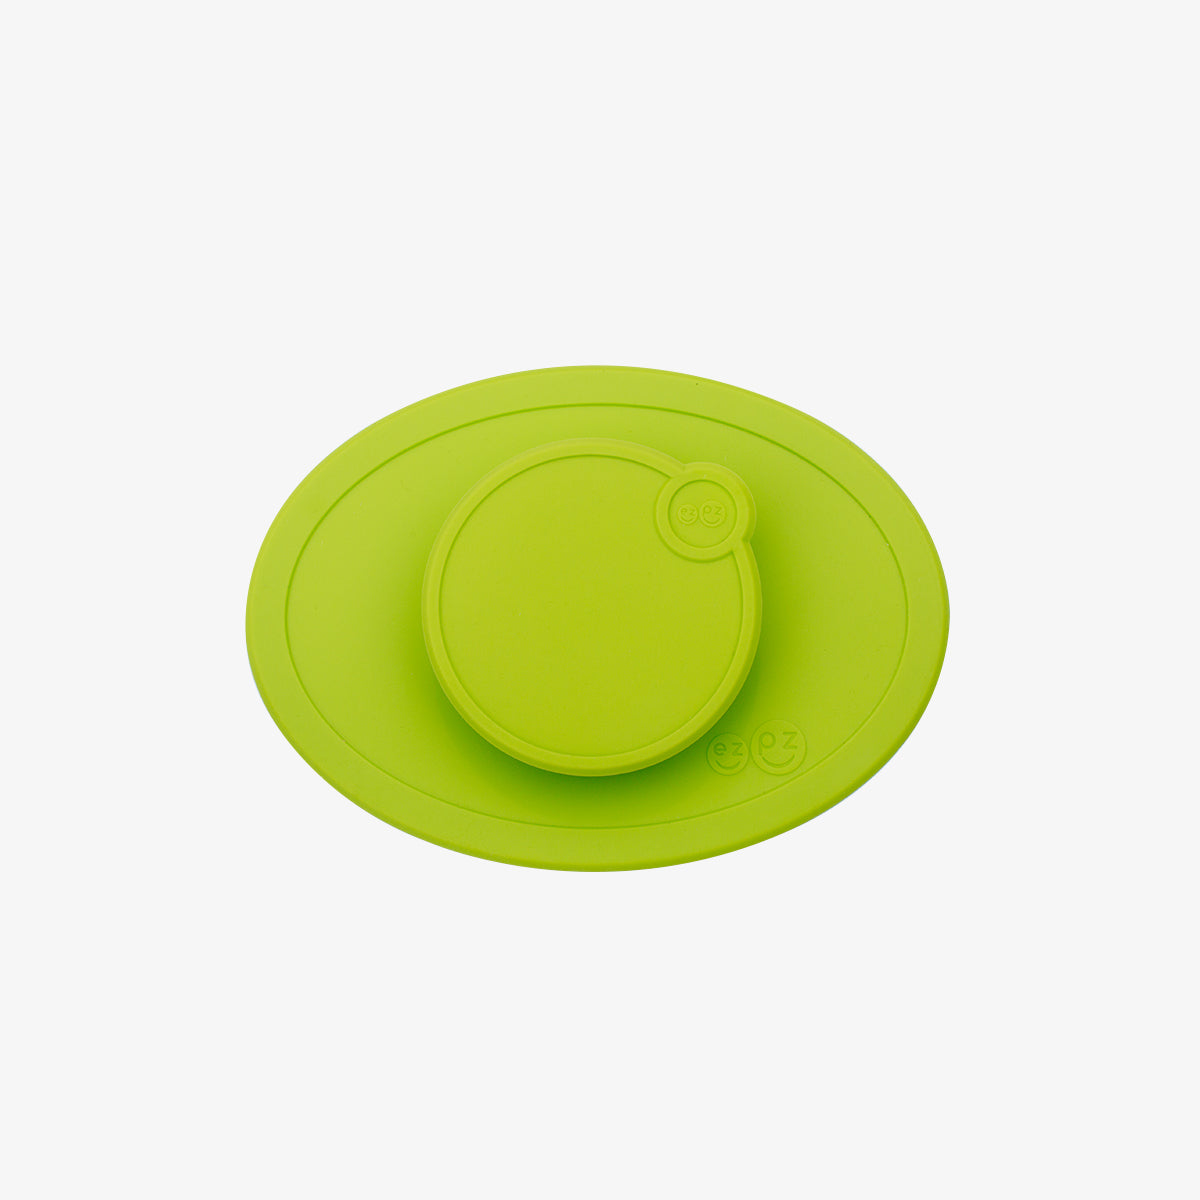 Tiny Bowl Lid in Lime / Storage Lids for the Tiny Bowl by ezpz / Silicone Lid for Baby Bowl